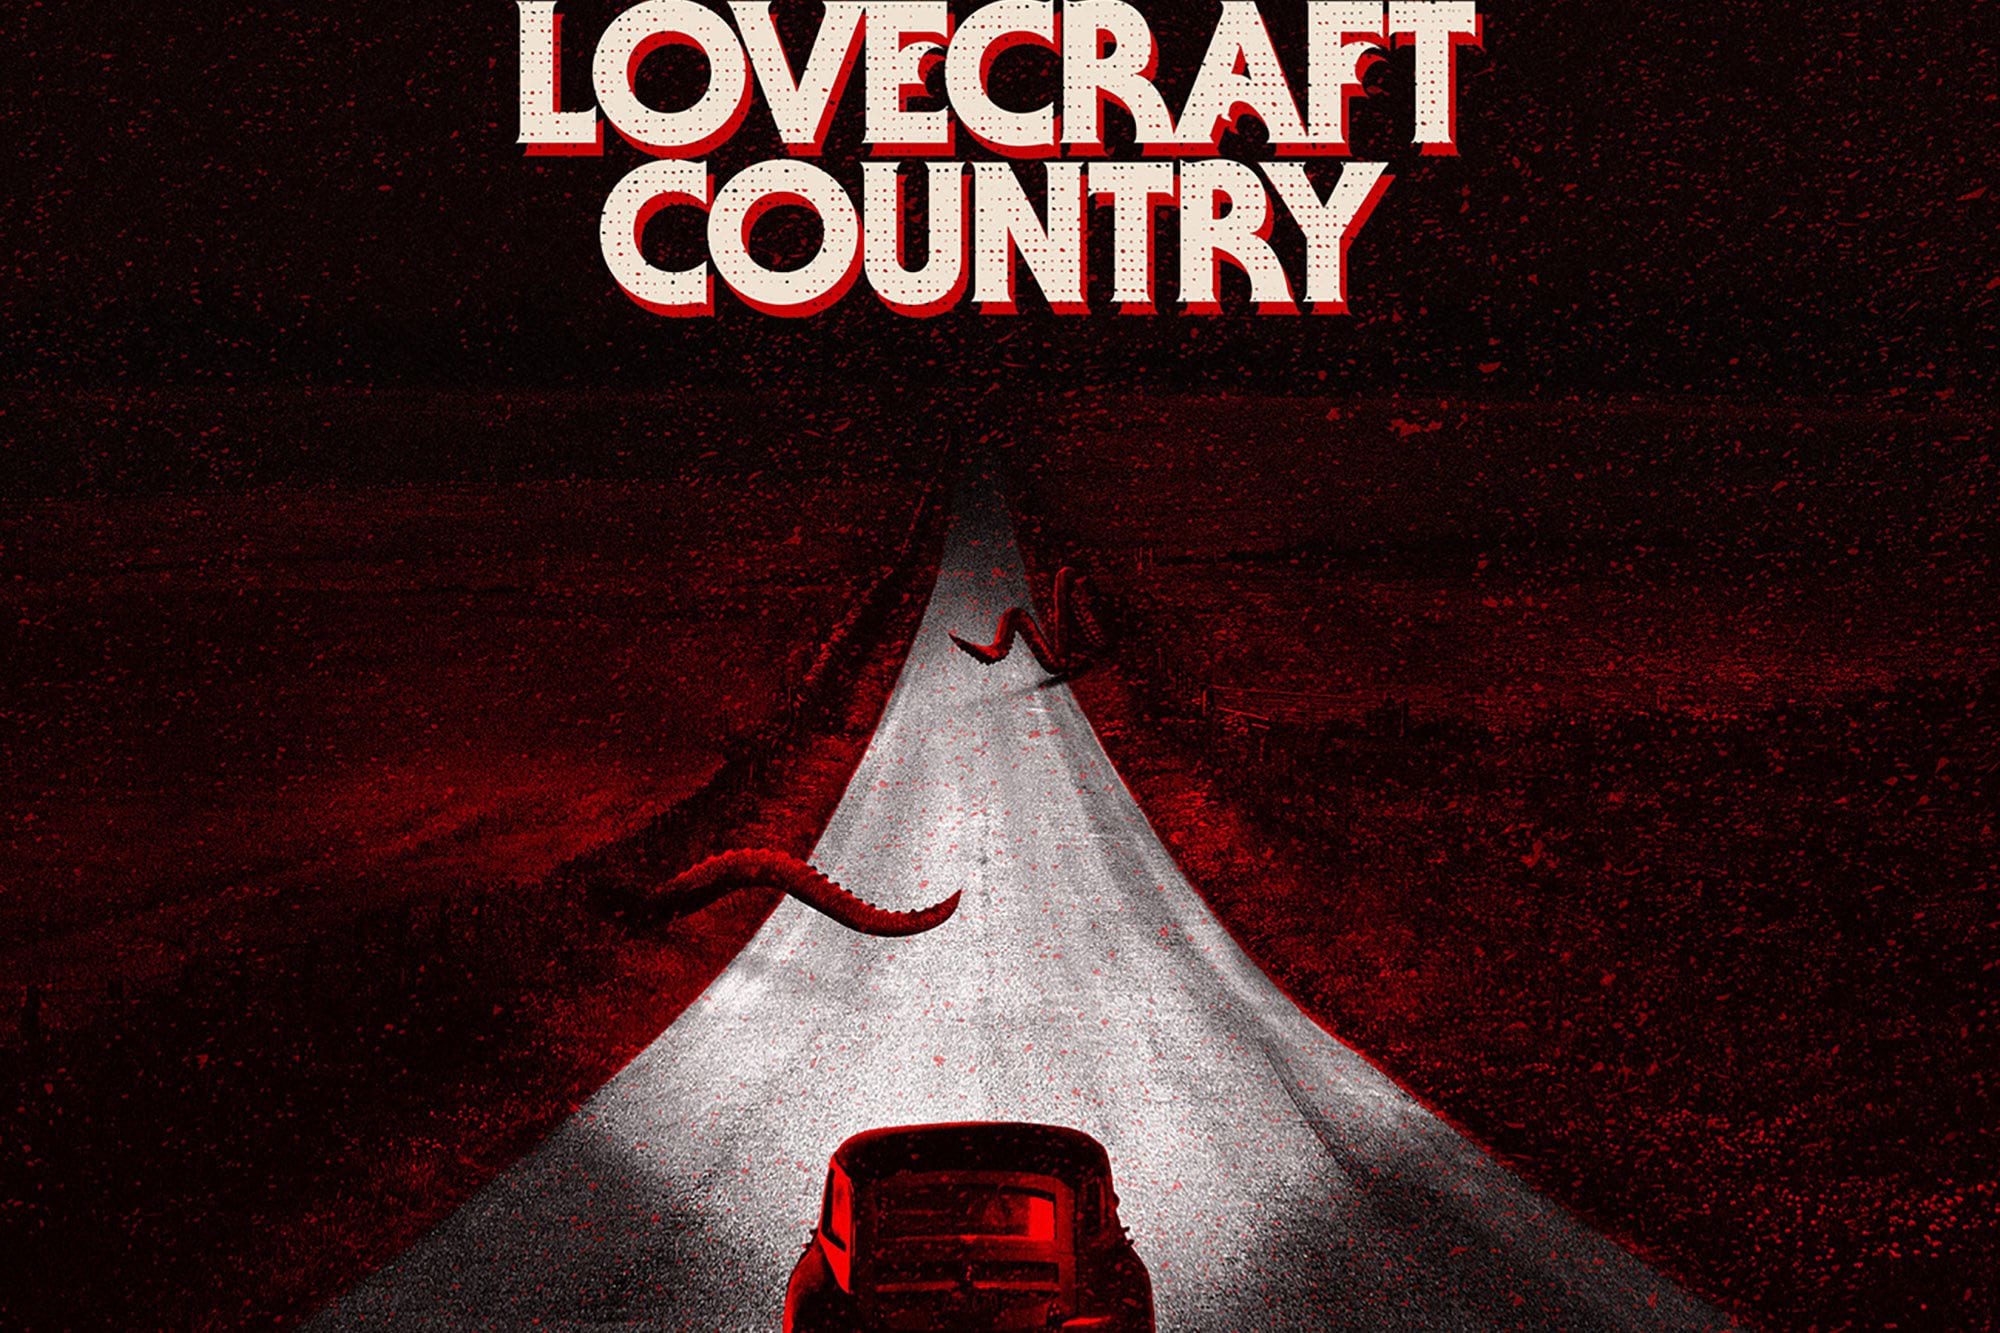 ‘Lovecraft Country’ Is Heady, Poetic, and Mangled